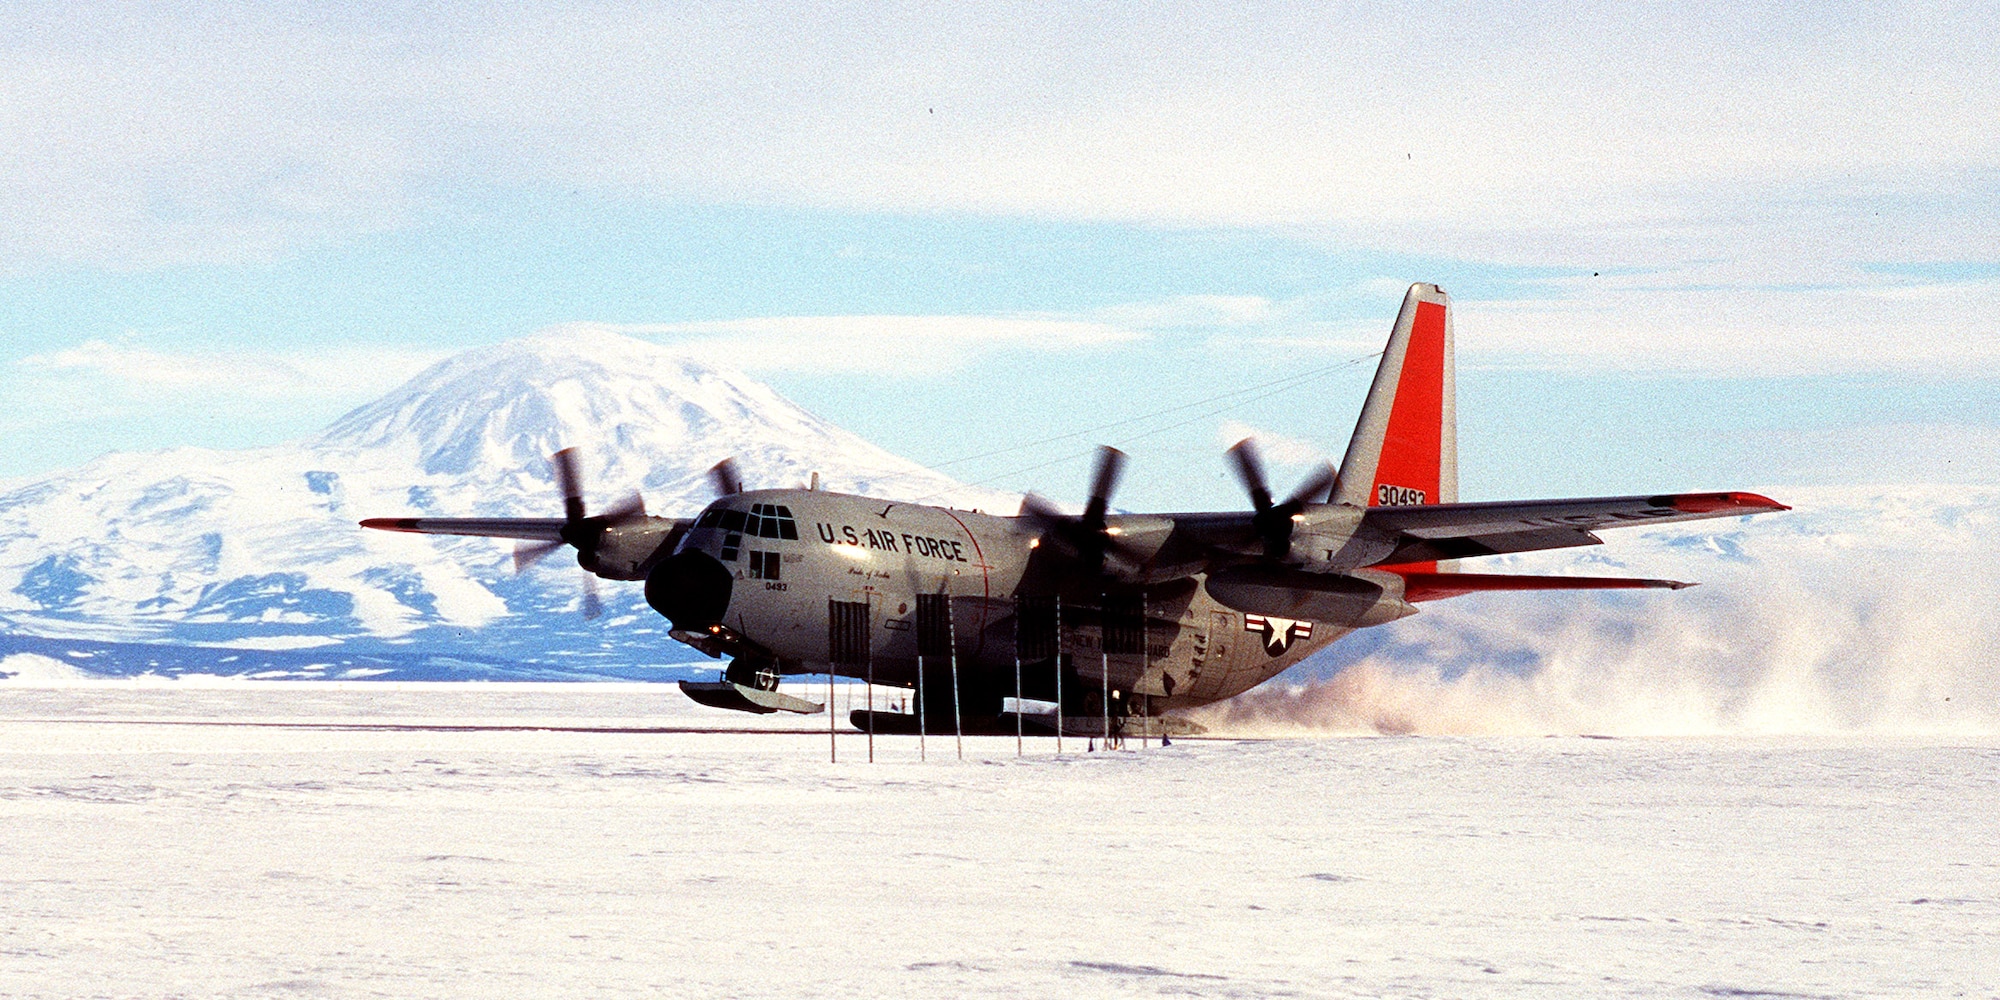 A U.S. Air Force LC-130 Hercules from the New York Air National Guard's 109th Airlift Wing touches down near McMurdo, Antarctica.  The first plane landed there 50 years ago. (U.S. Air Force photo) 